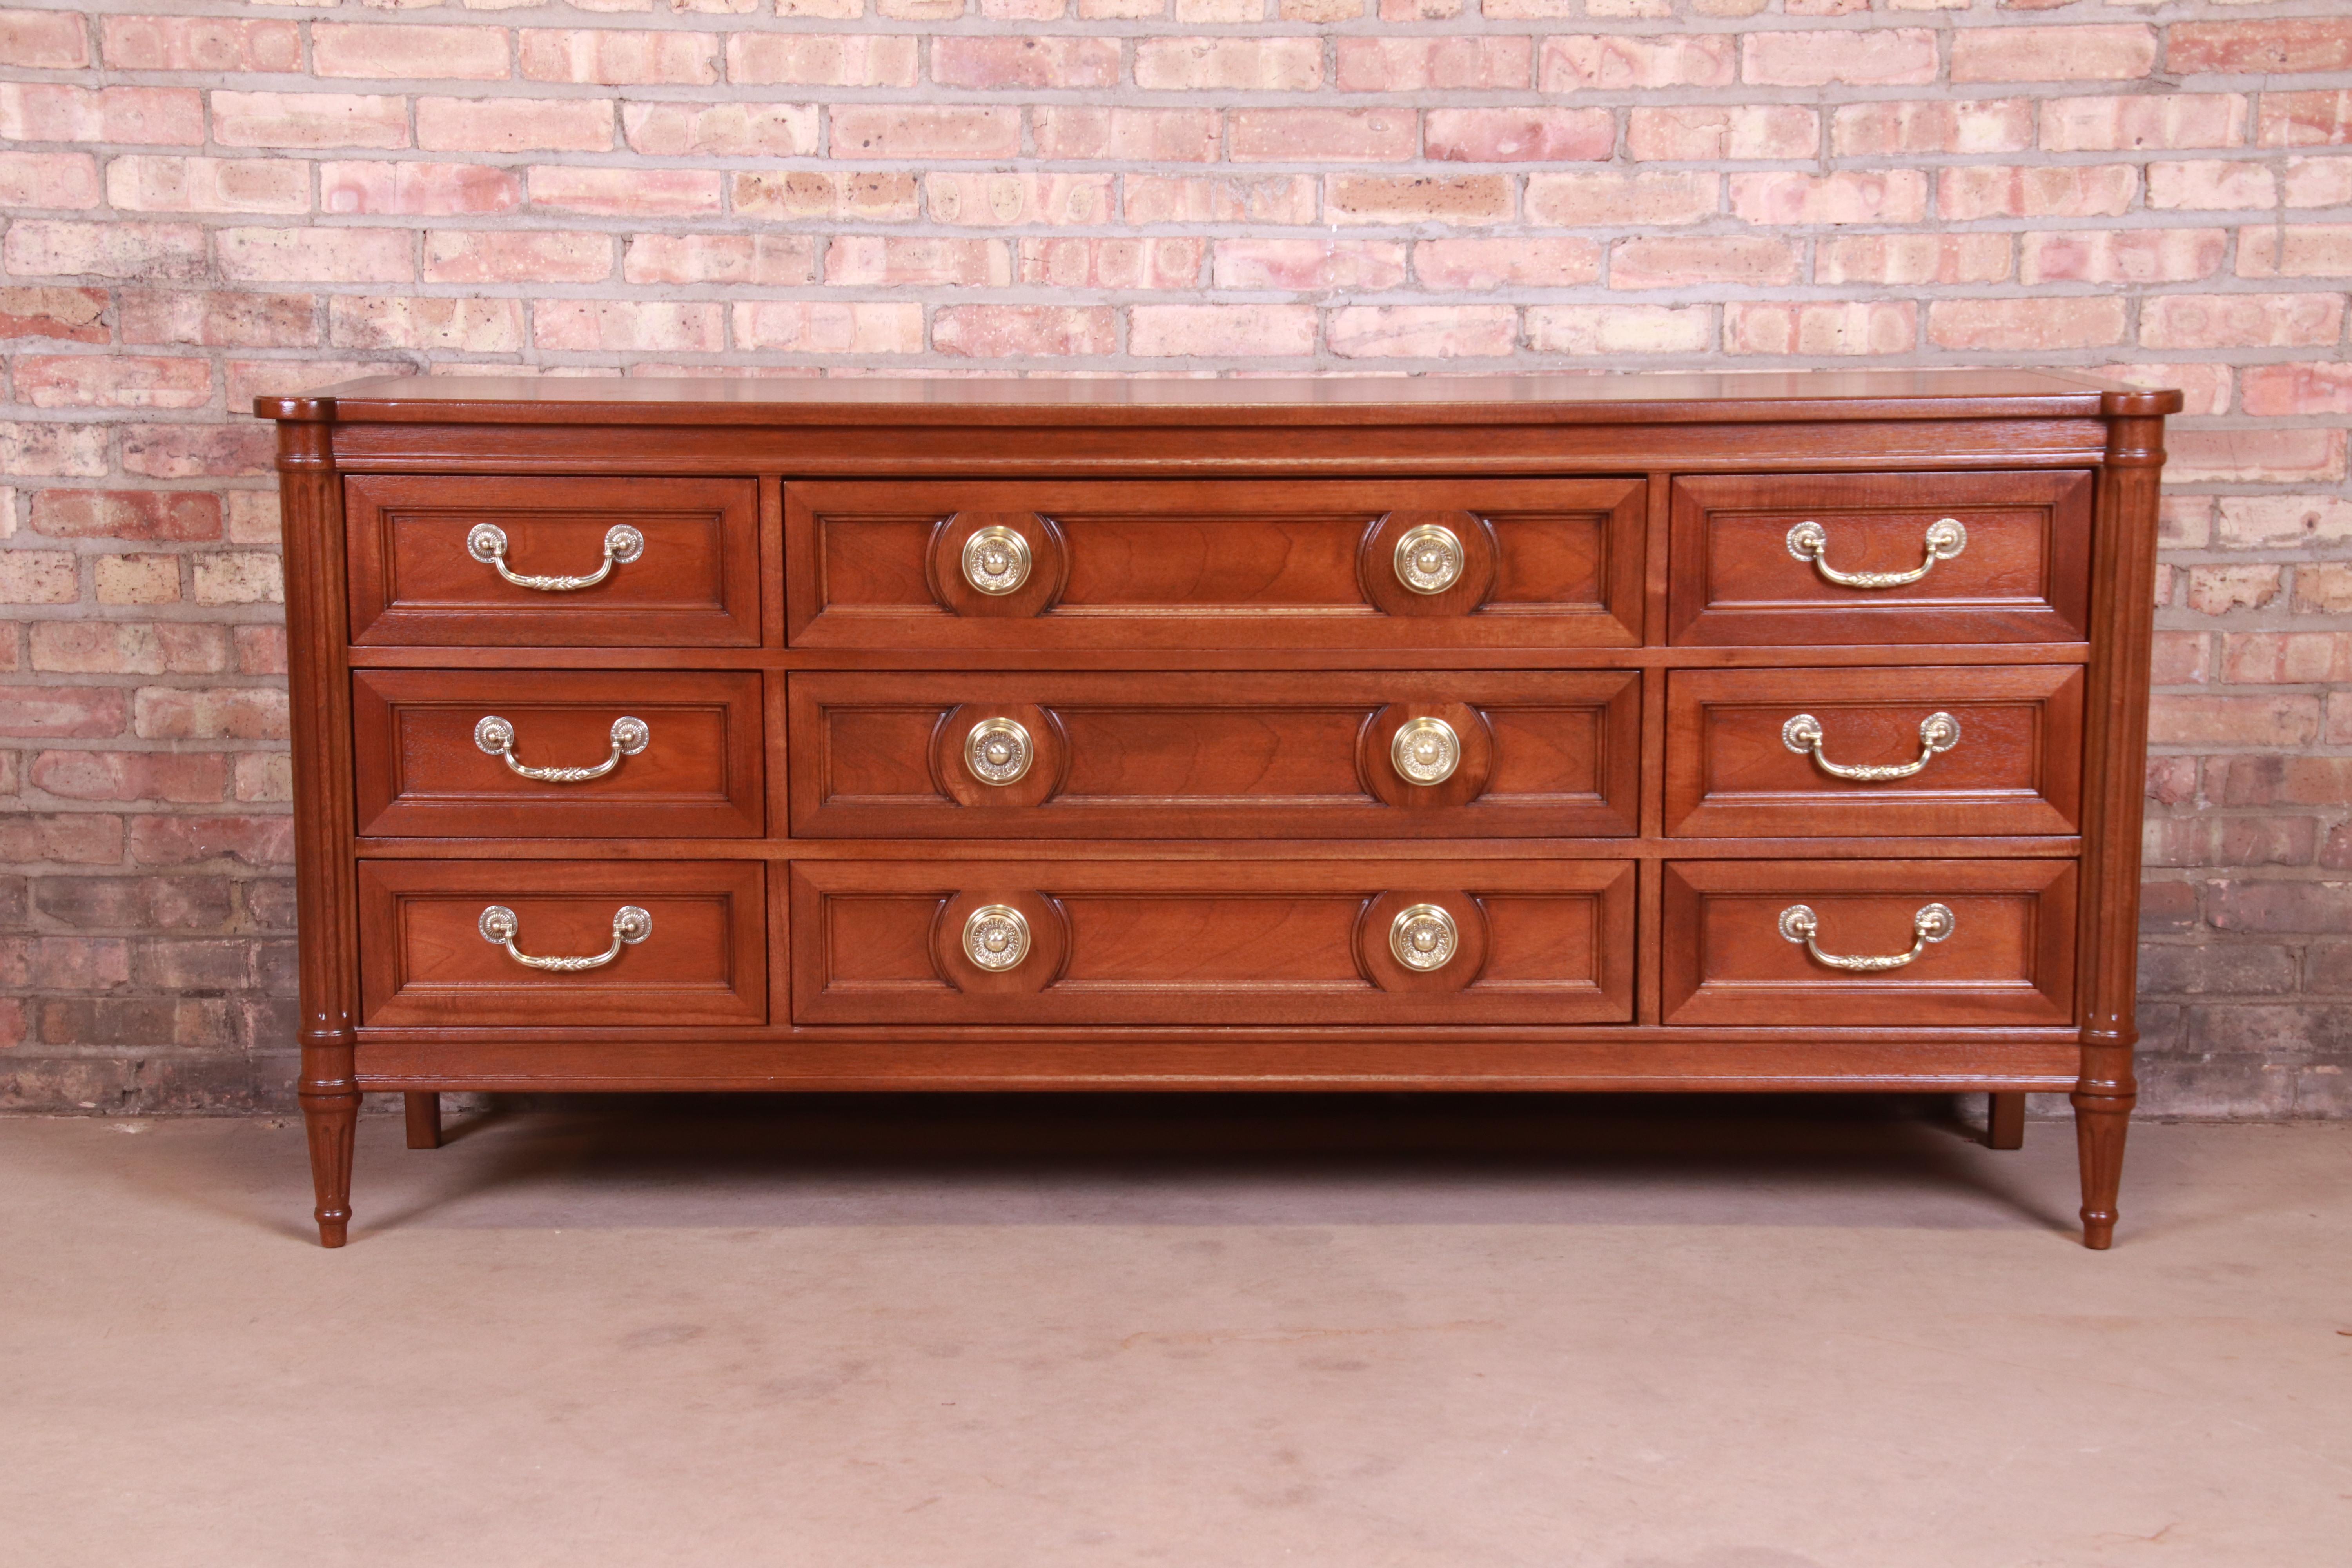 A gorgeous French Regency Louis XVI style triple dresser or credenza

By Drexel 